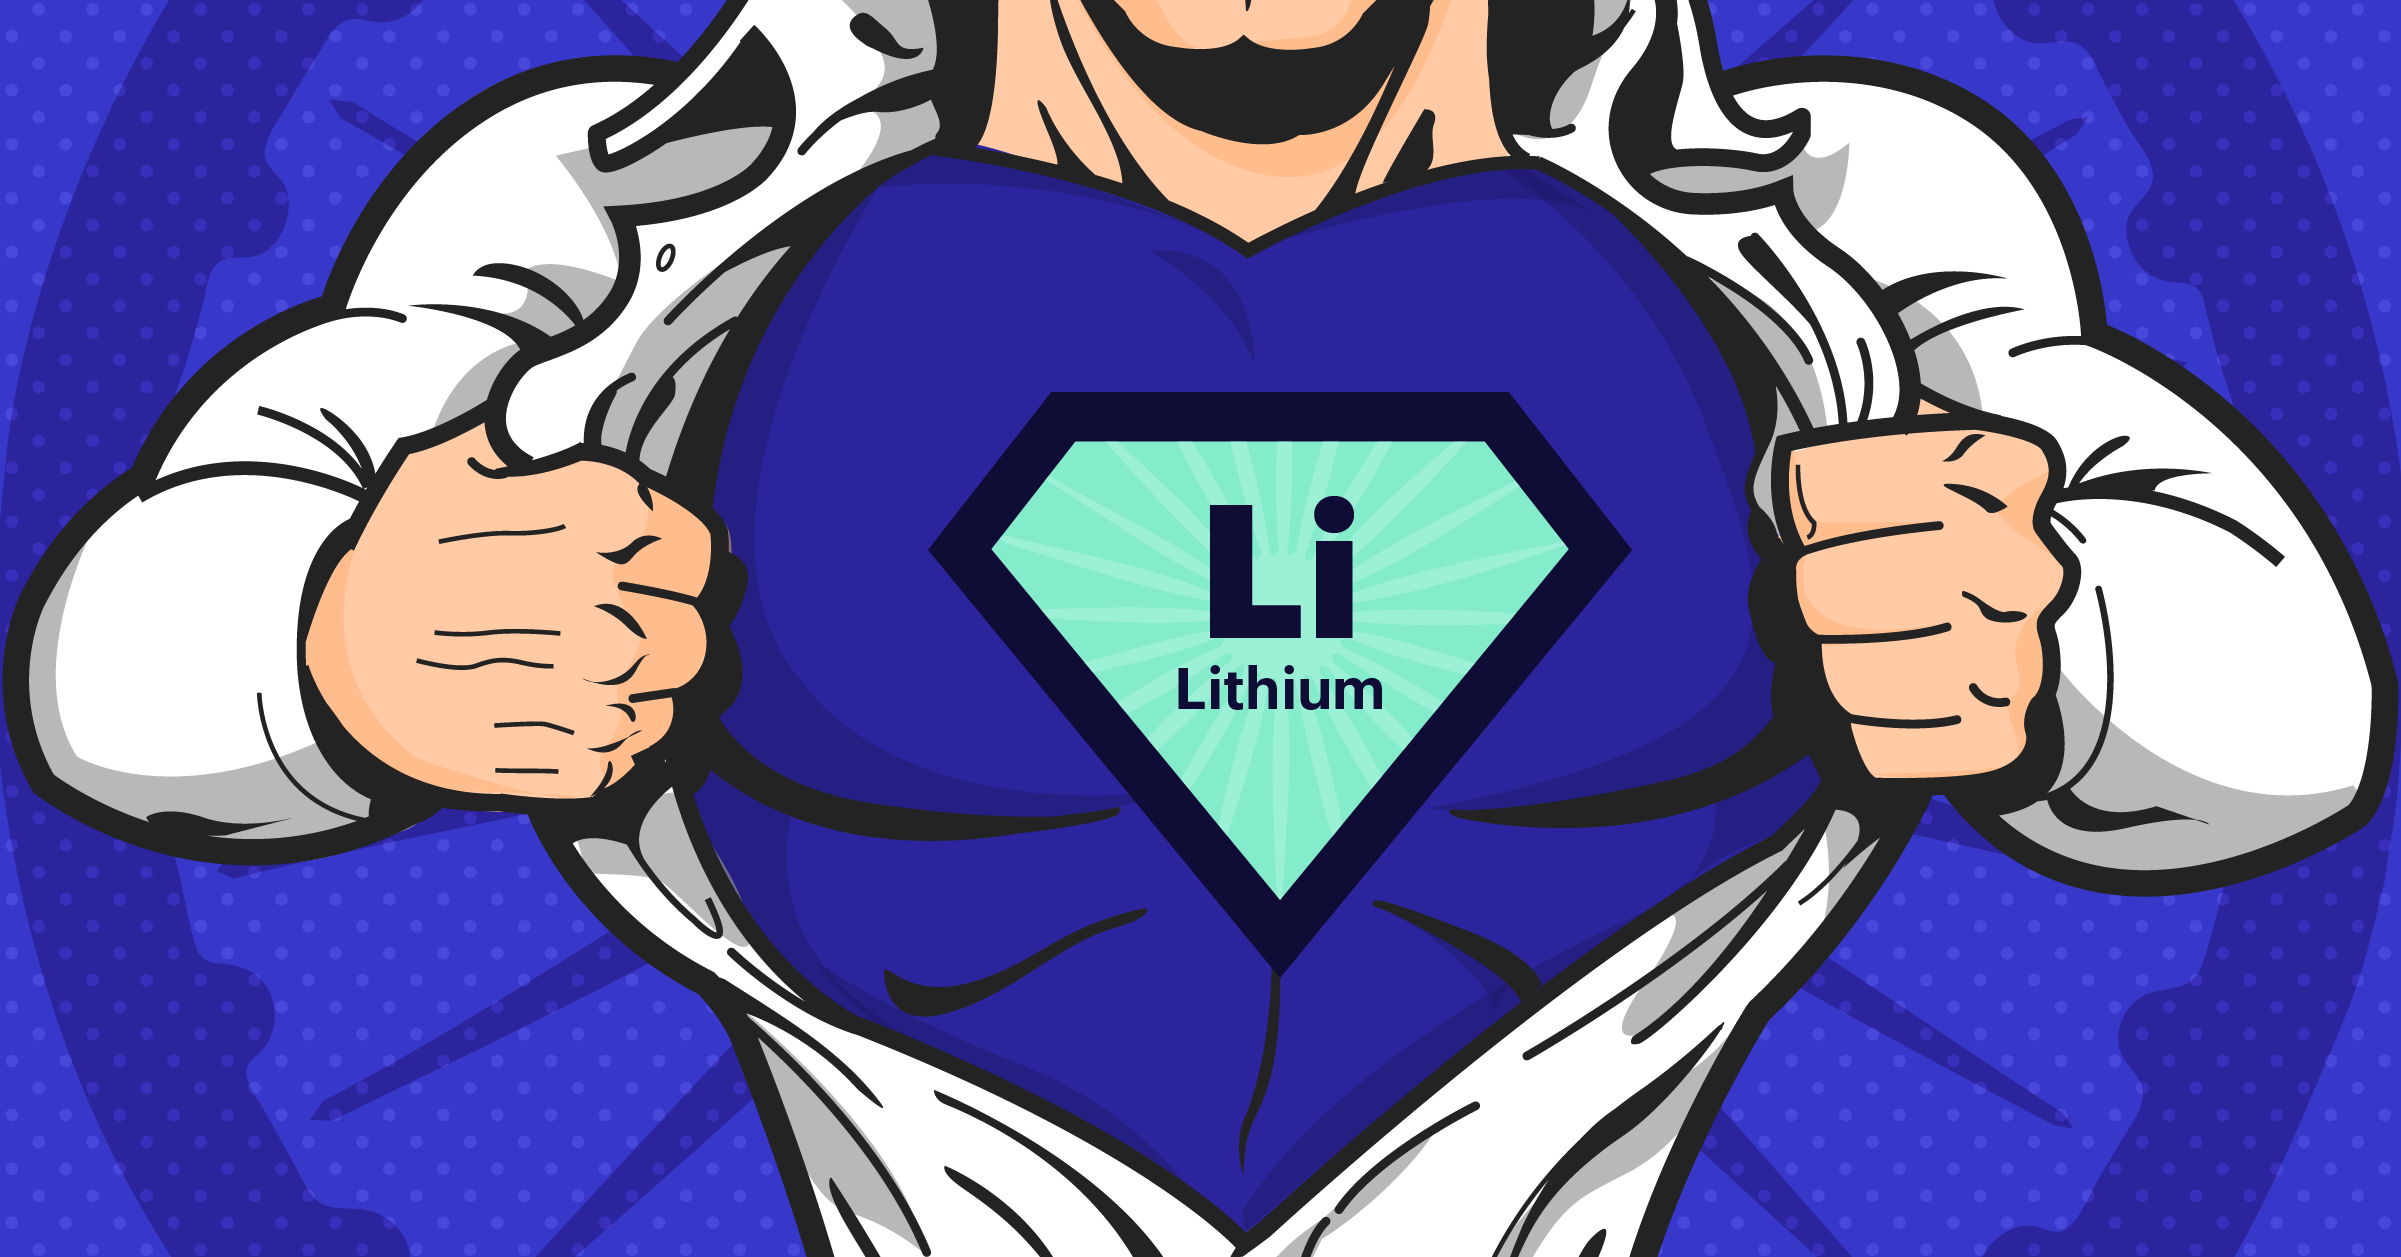 Move over the Gold rush, it’s time for the Lithium craze!